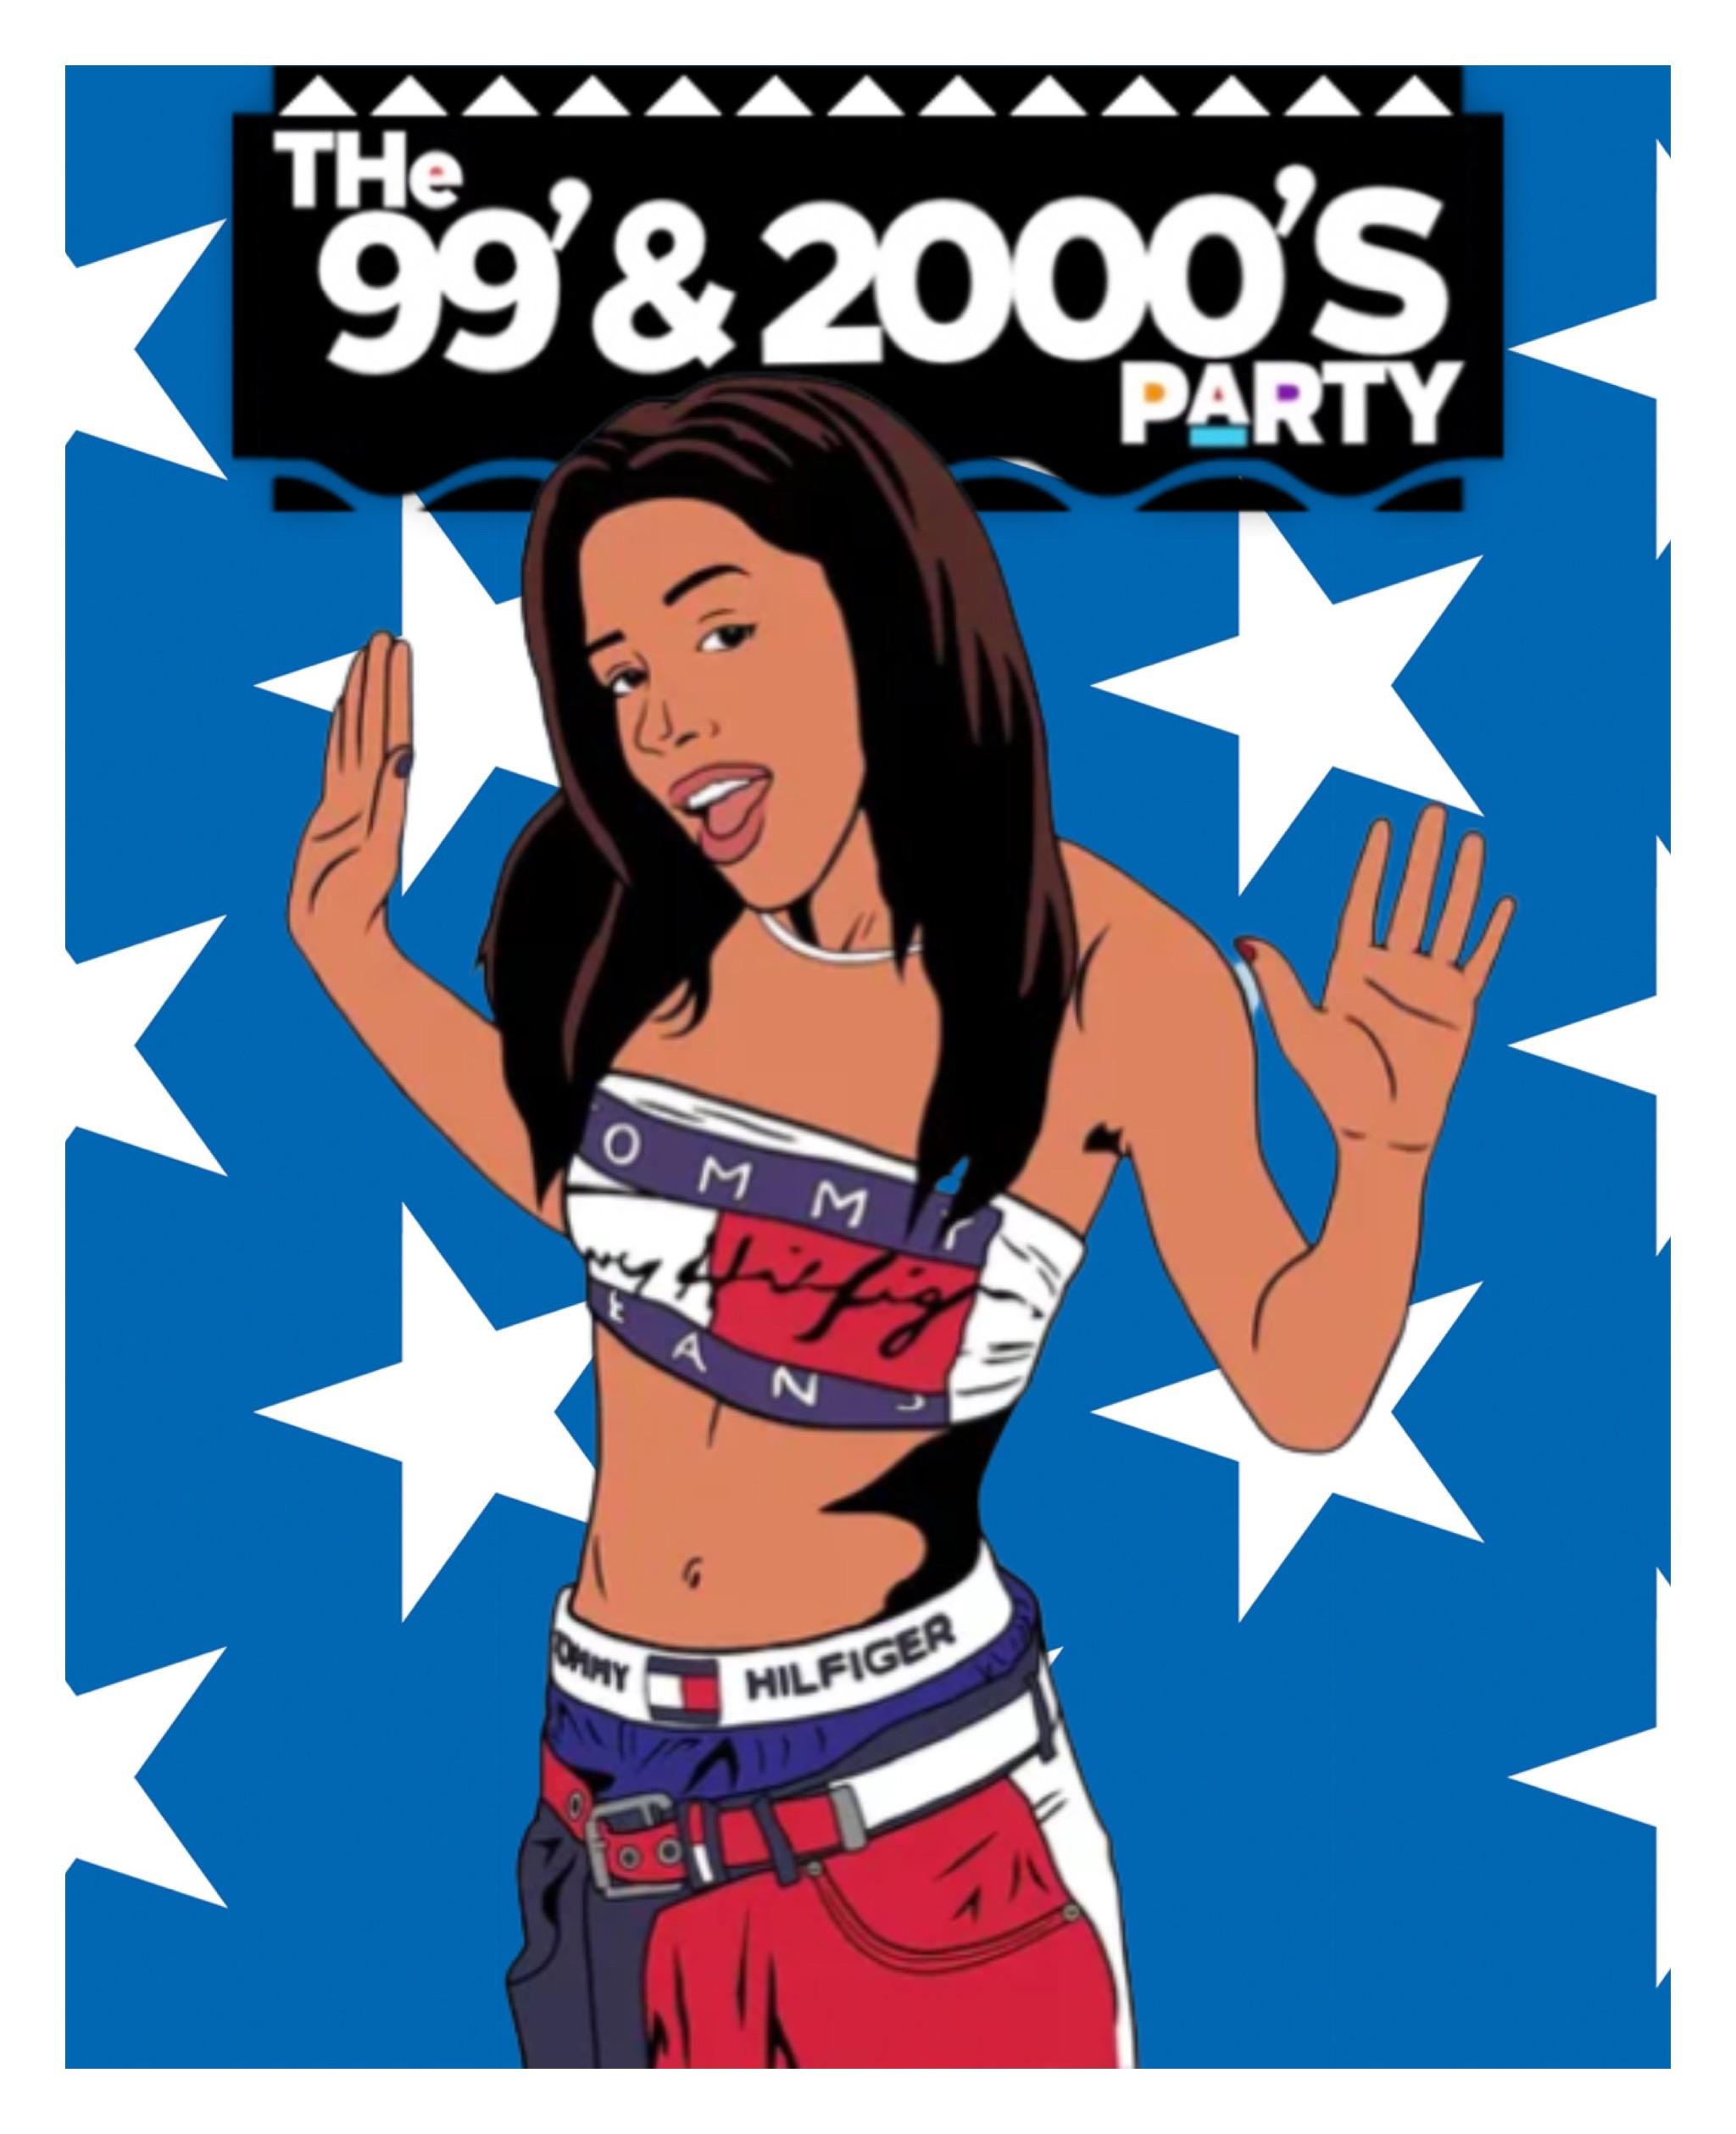 THE 99 & 2000’S PARTY @ THE REGENT